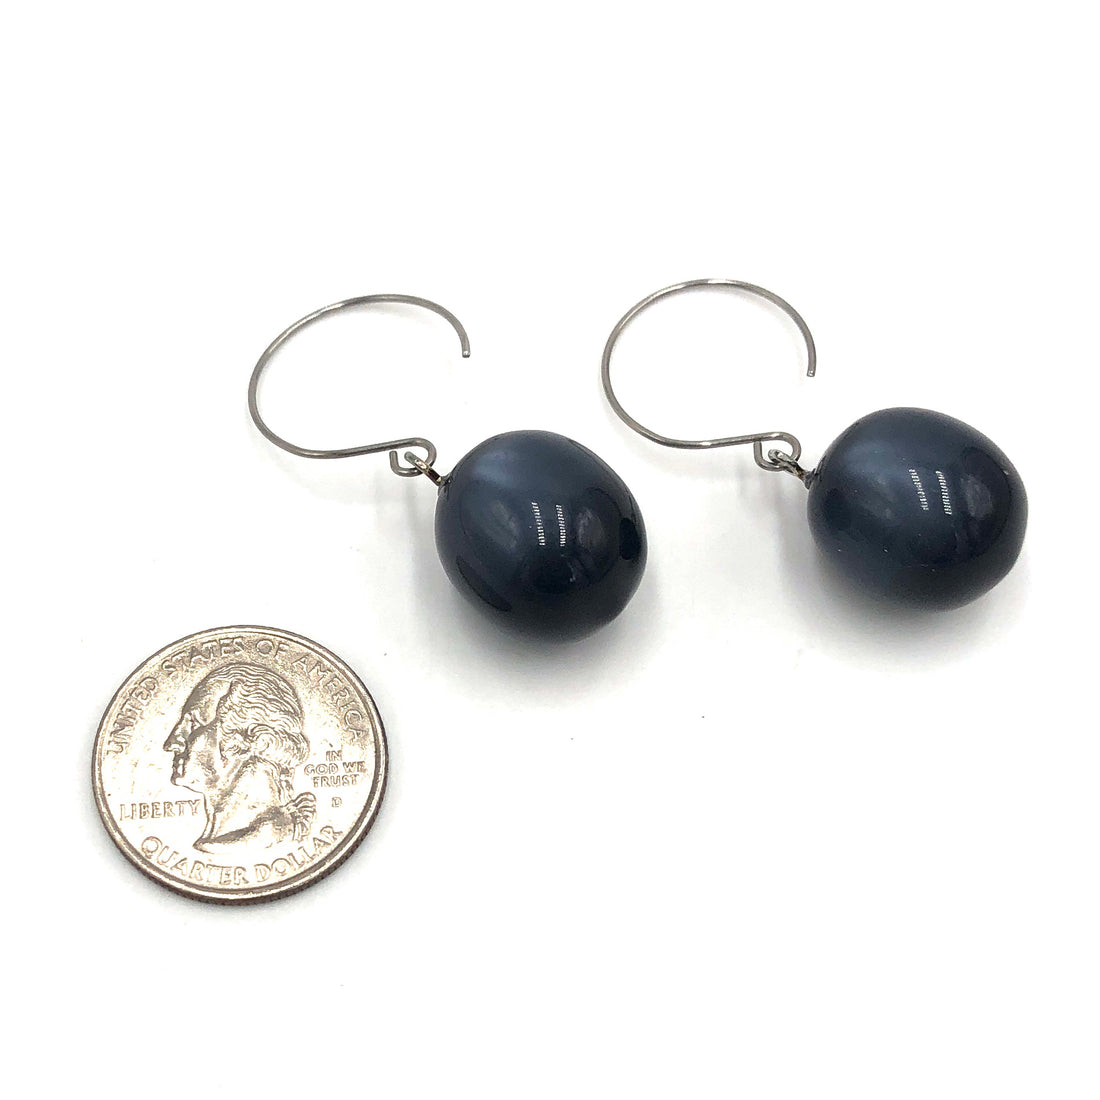 Charcoal Grey Moonglow Statement Earrings